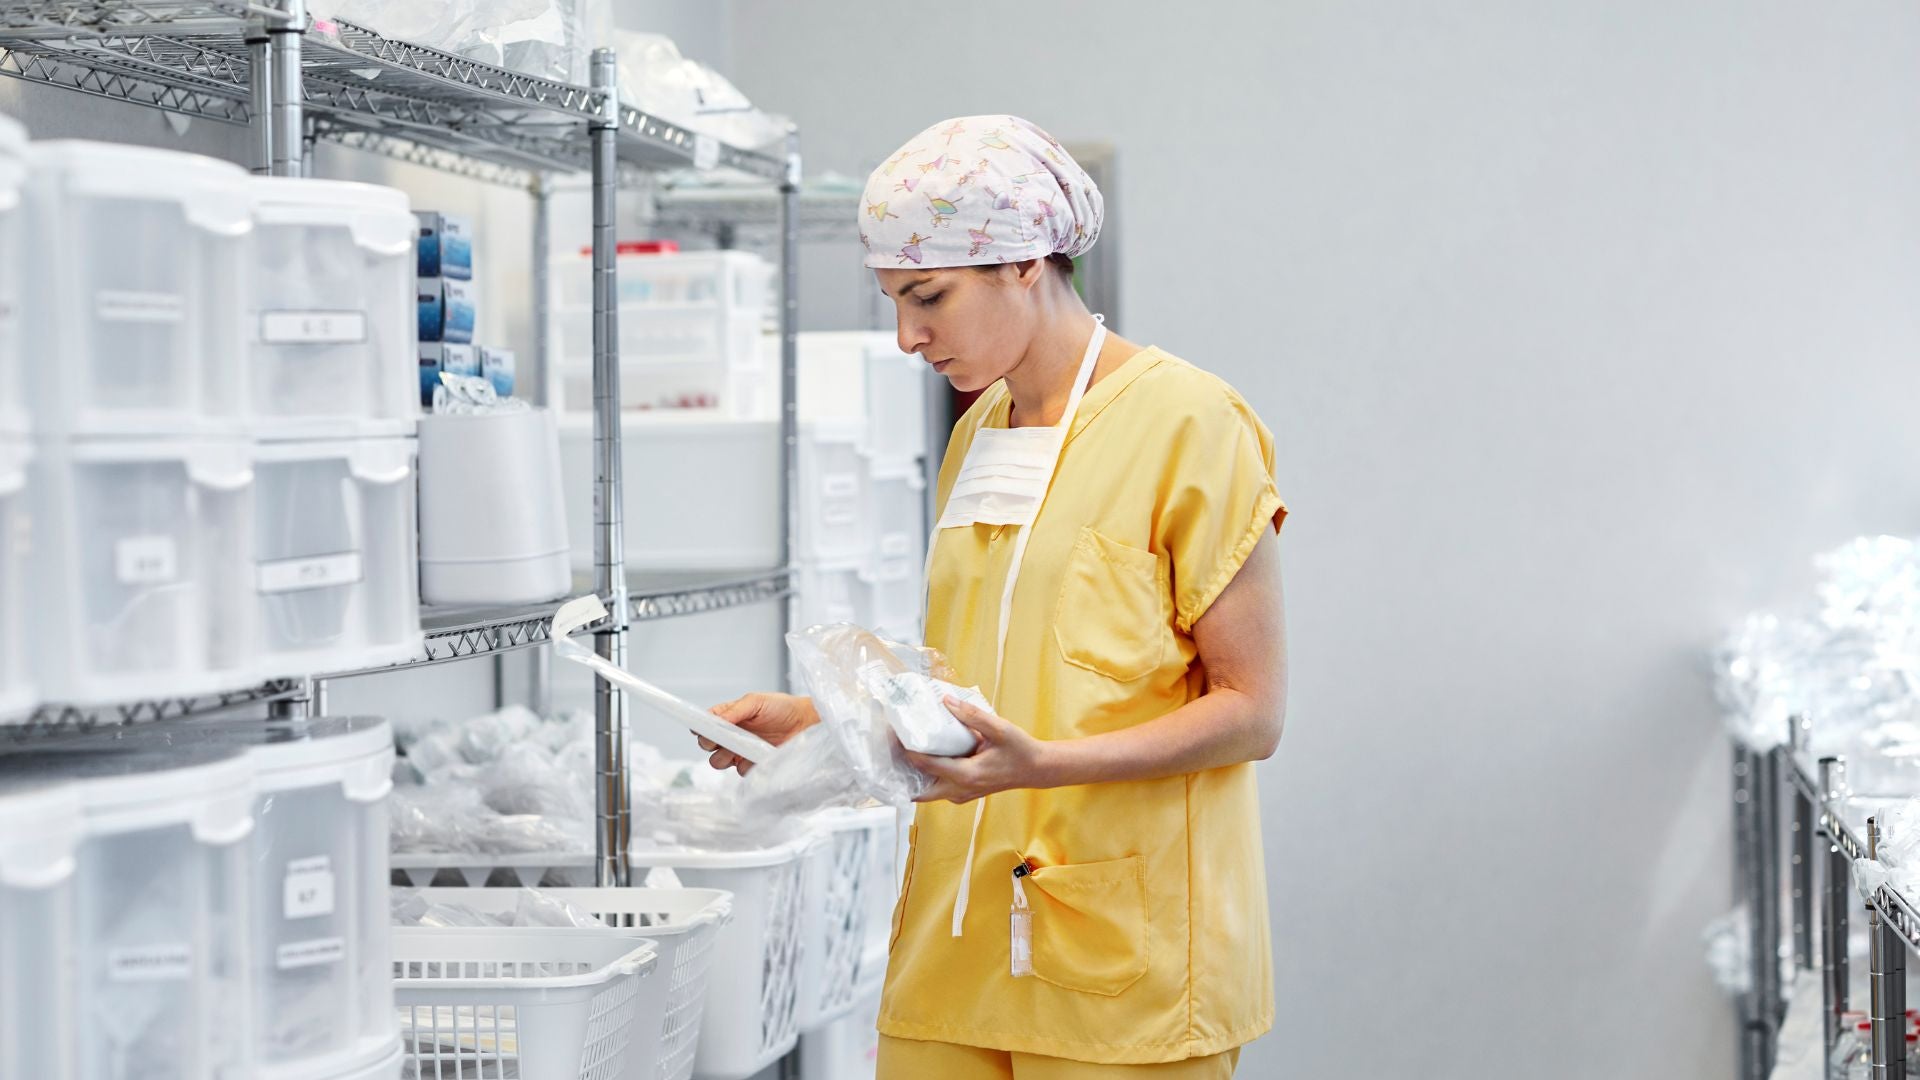 Maternova's Expertise in Medical Supply Chains